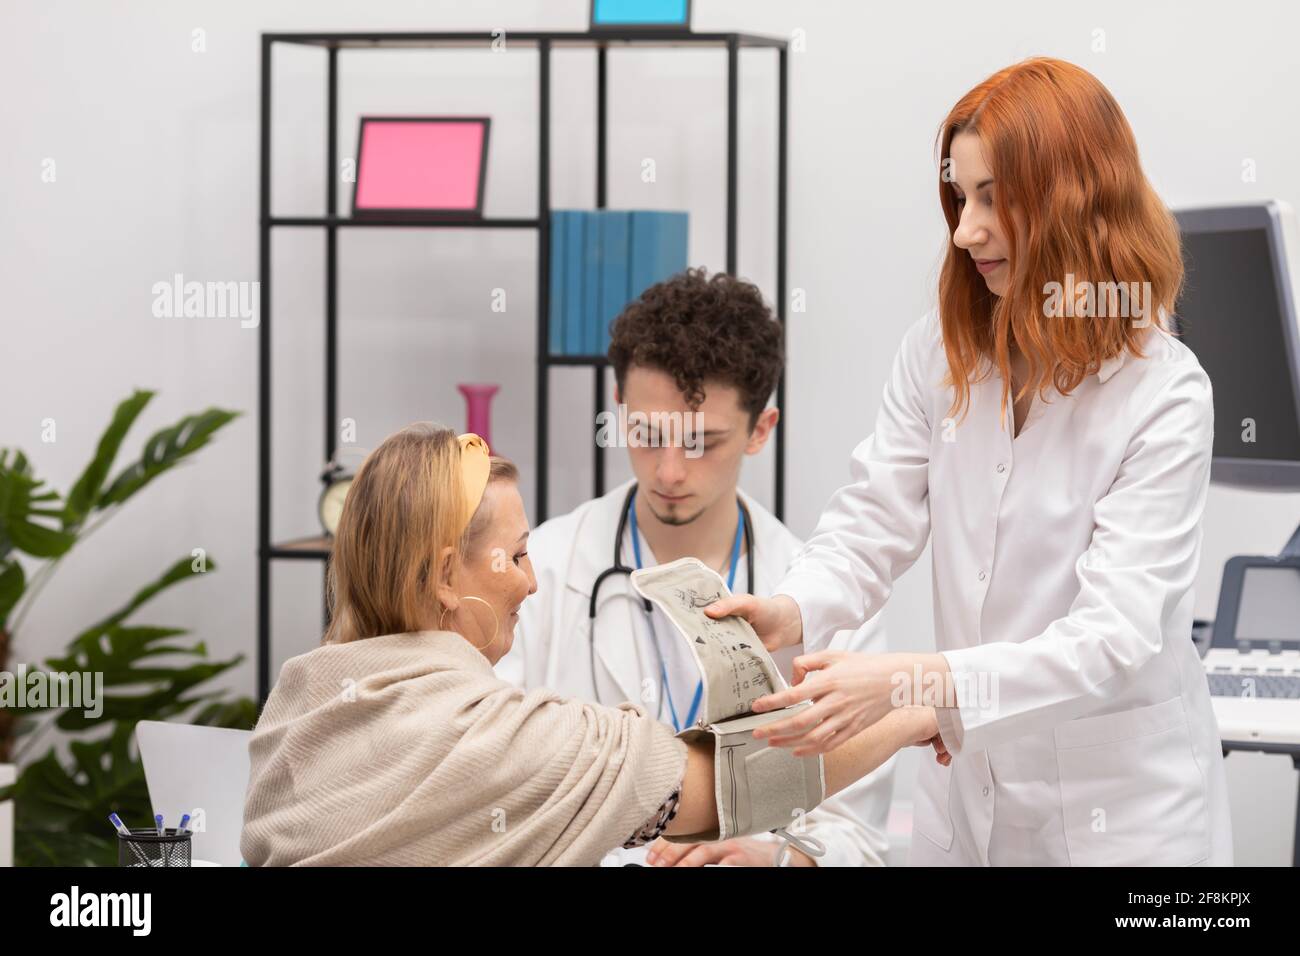 A nurse places a blood pressure monitor on a patient's arm to check blood pressure. The primary care physician and the intern Stock Photo